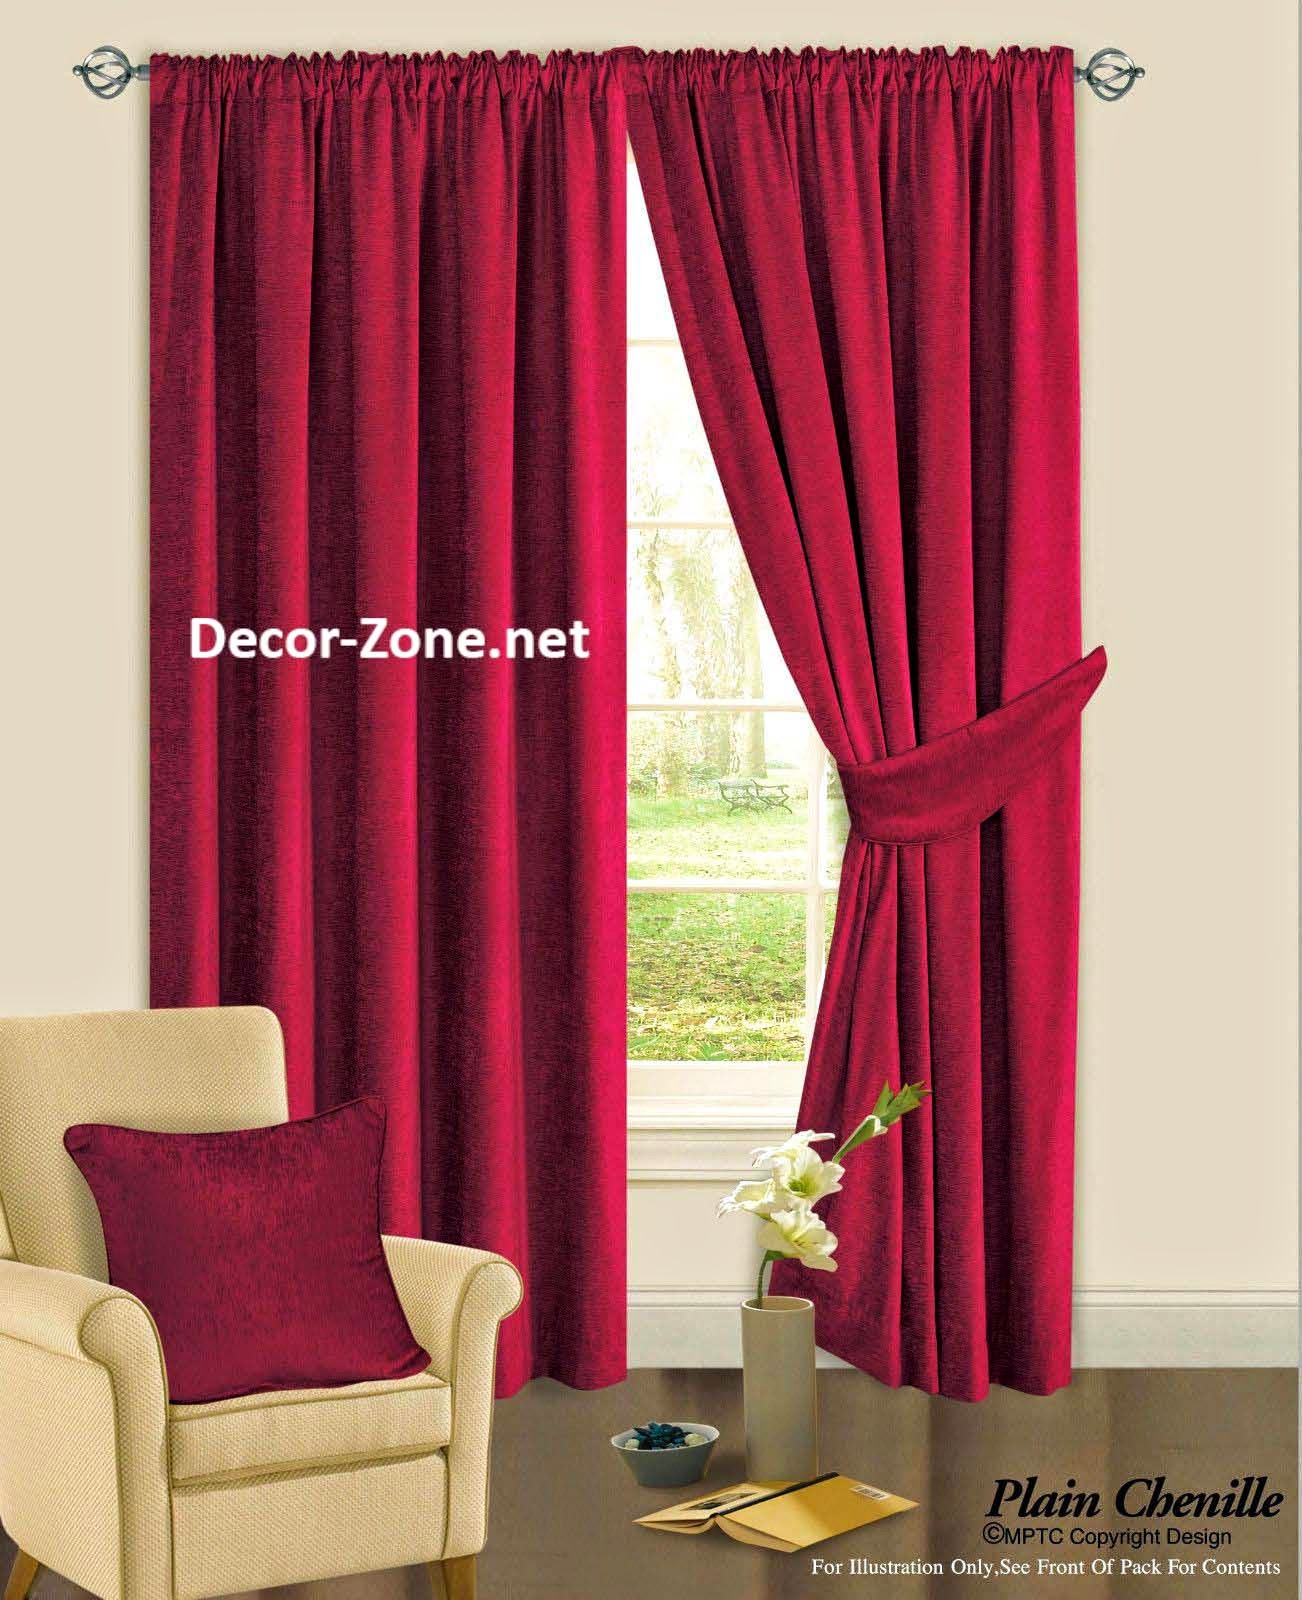 Bedroom curtain : 25 ideas and tips to choose curtains for 